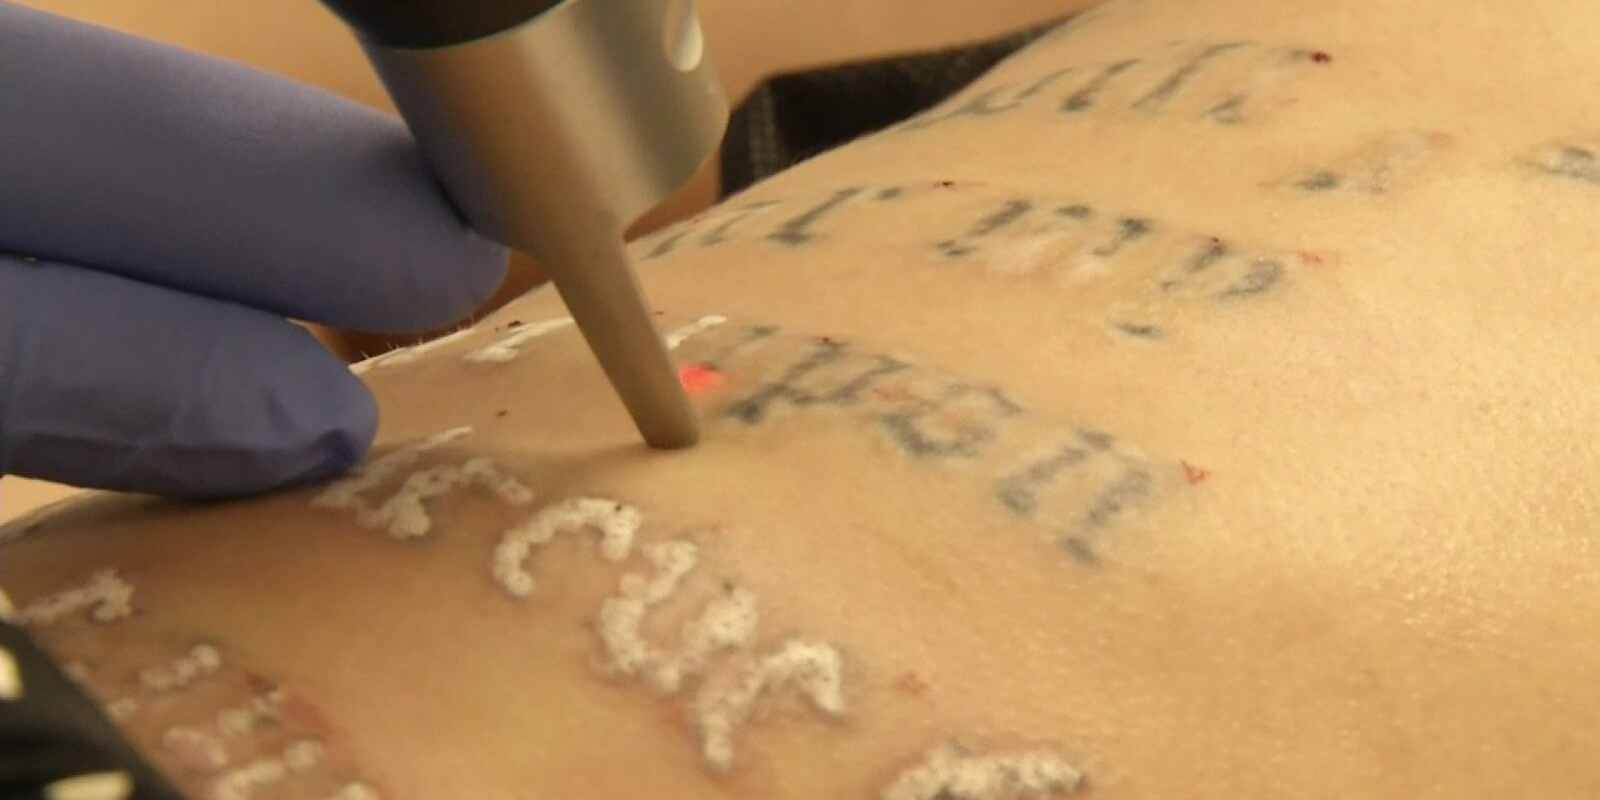 Laser Tattoo Removal Aftercare Products from ZOOTATTOO®